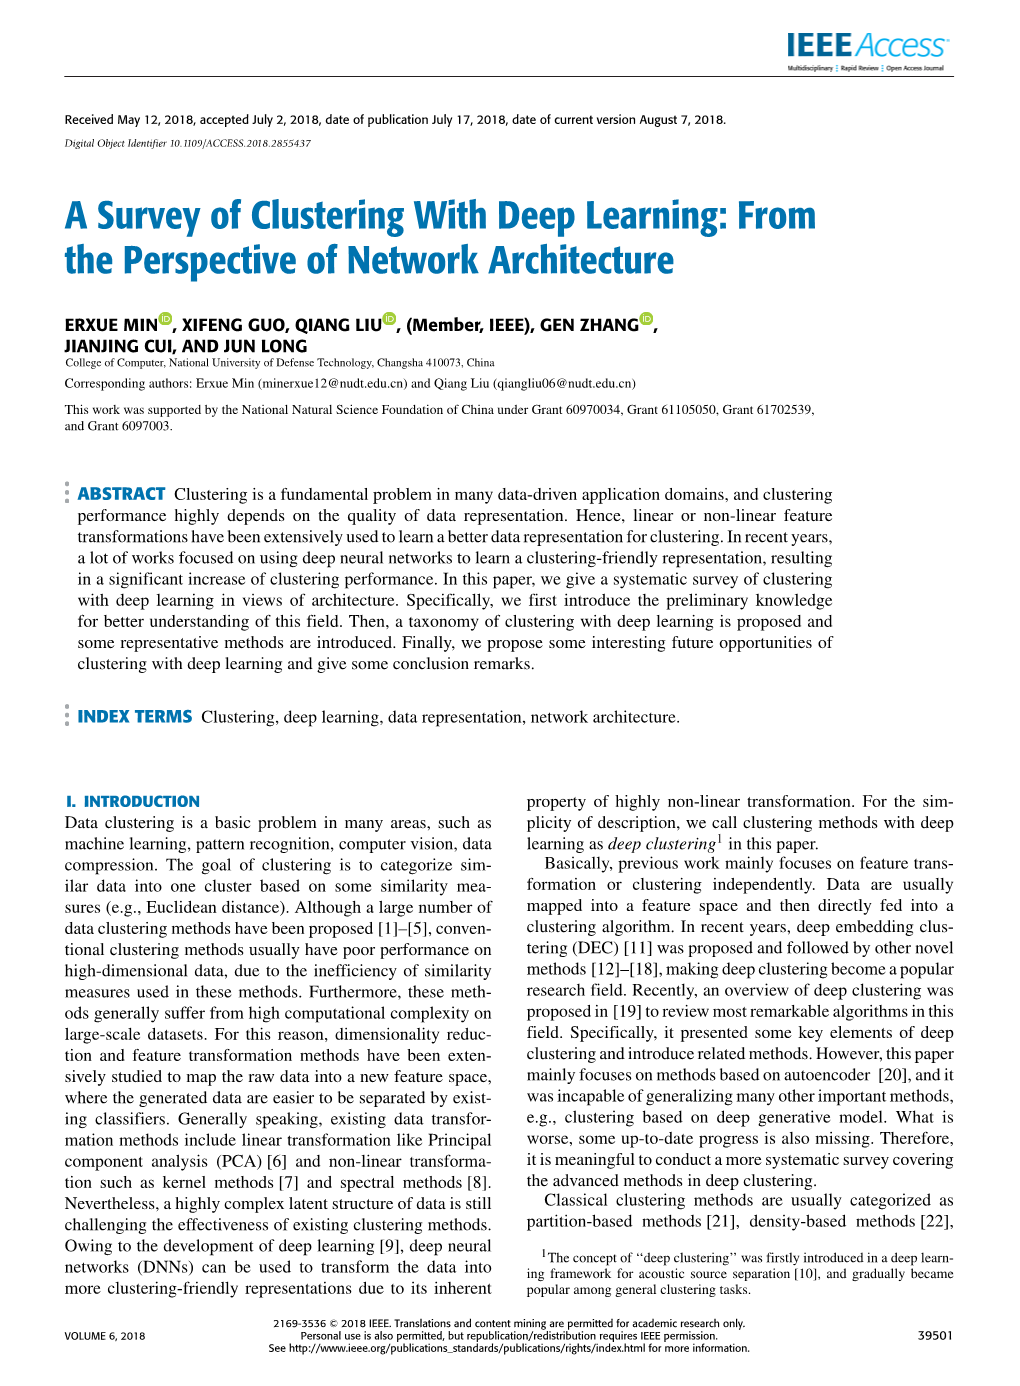 A Survey of Clustering with Deep Learning: from the Perspective of Network Architecture